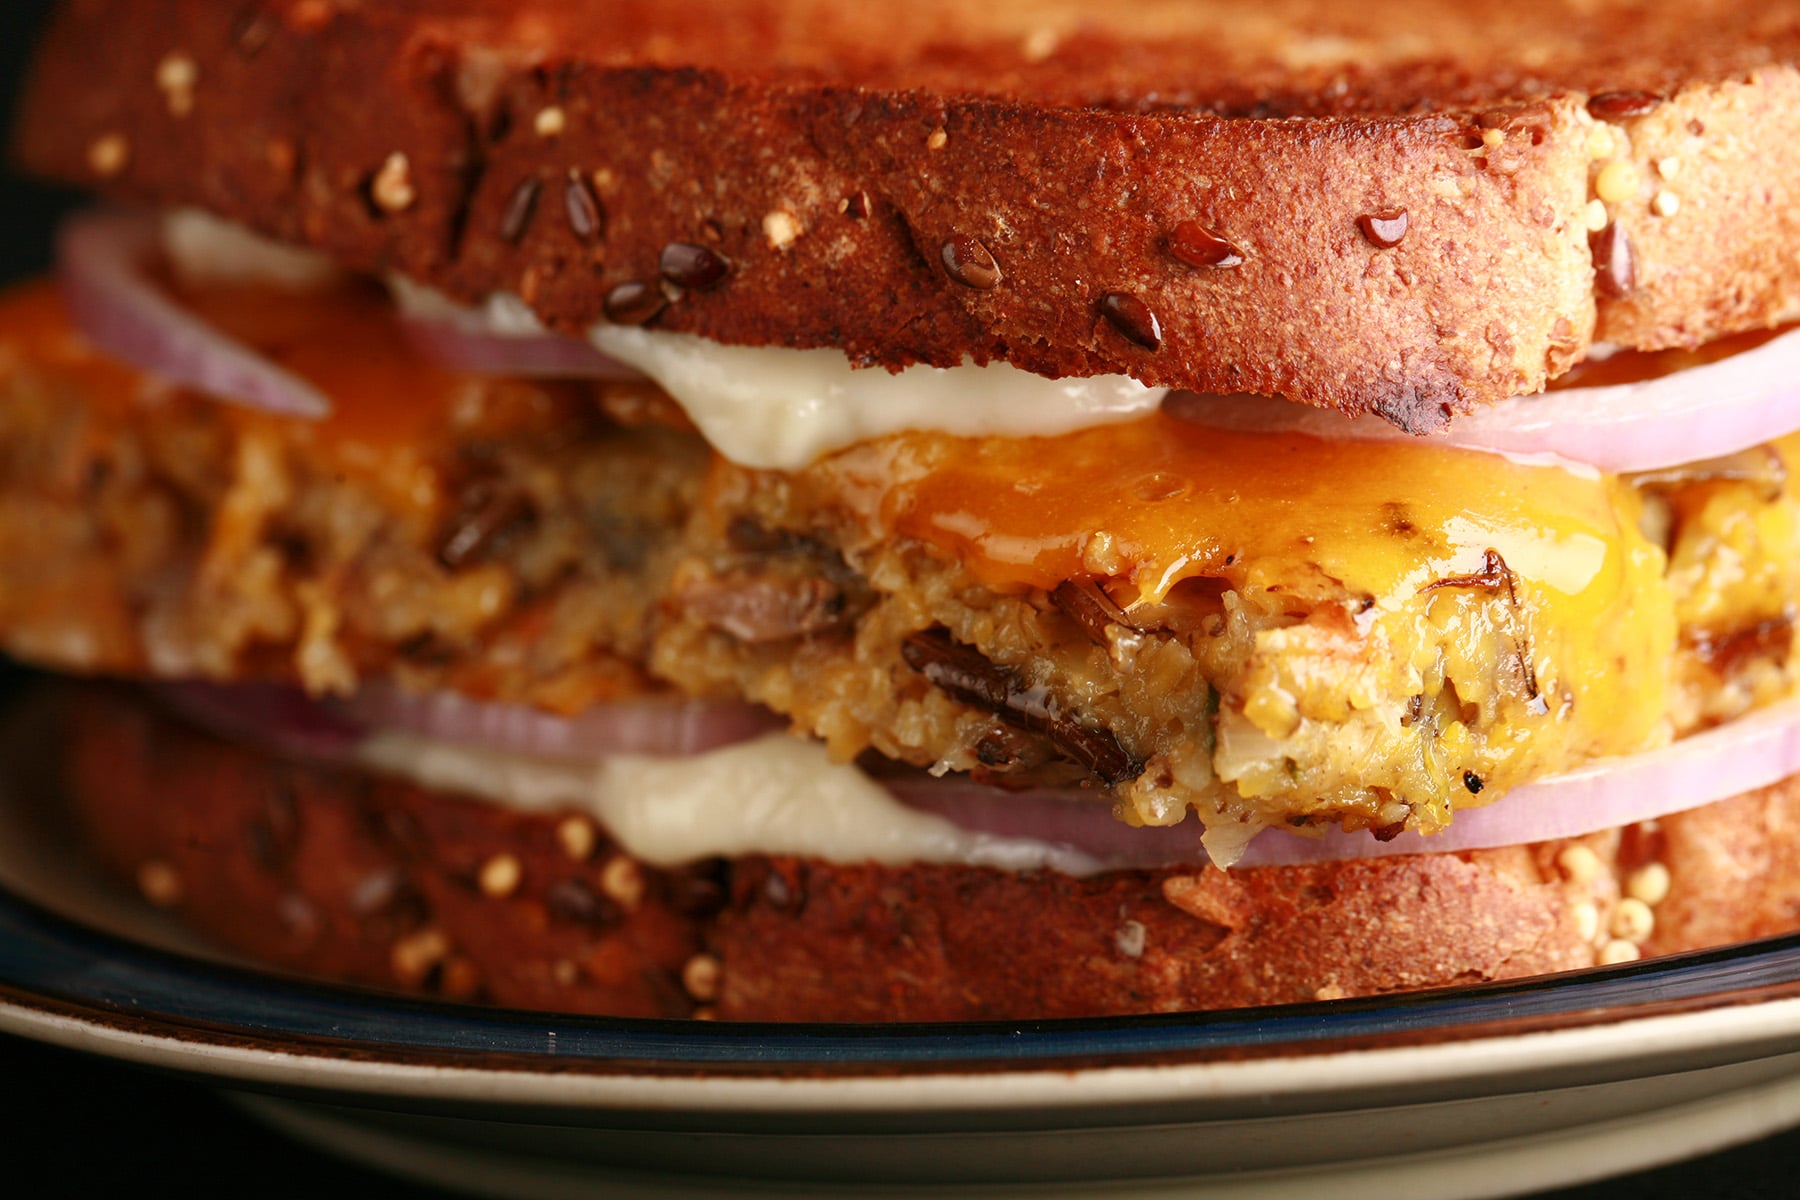 A close up photo of a toasted sandwich with polenta, mushrooms, wild rice, cheddar, red onions, and mayo visible.